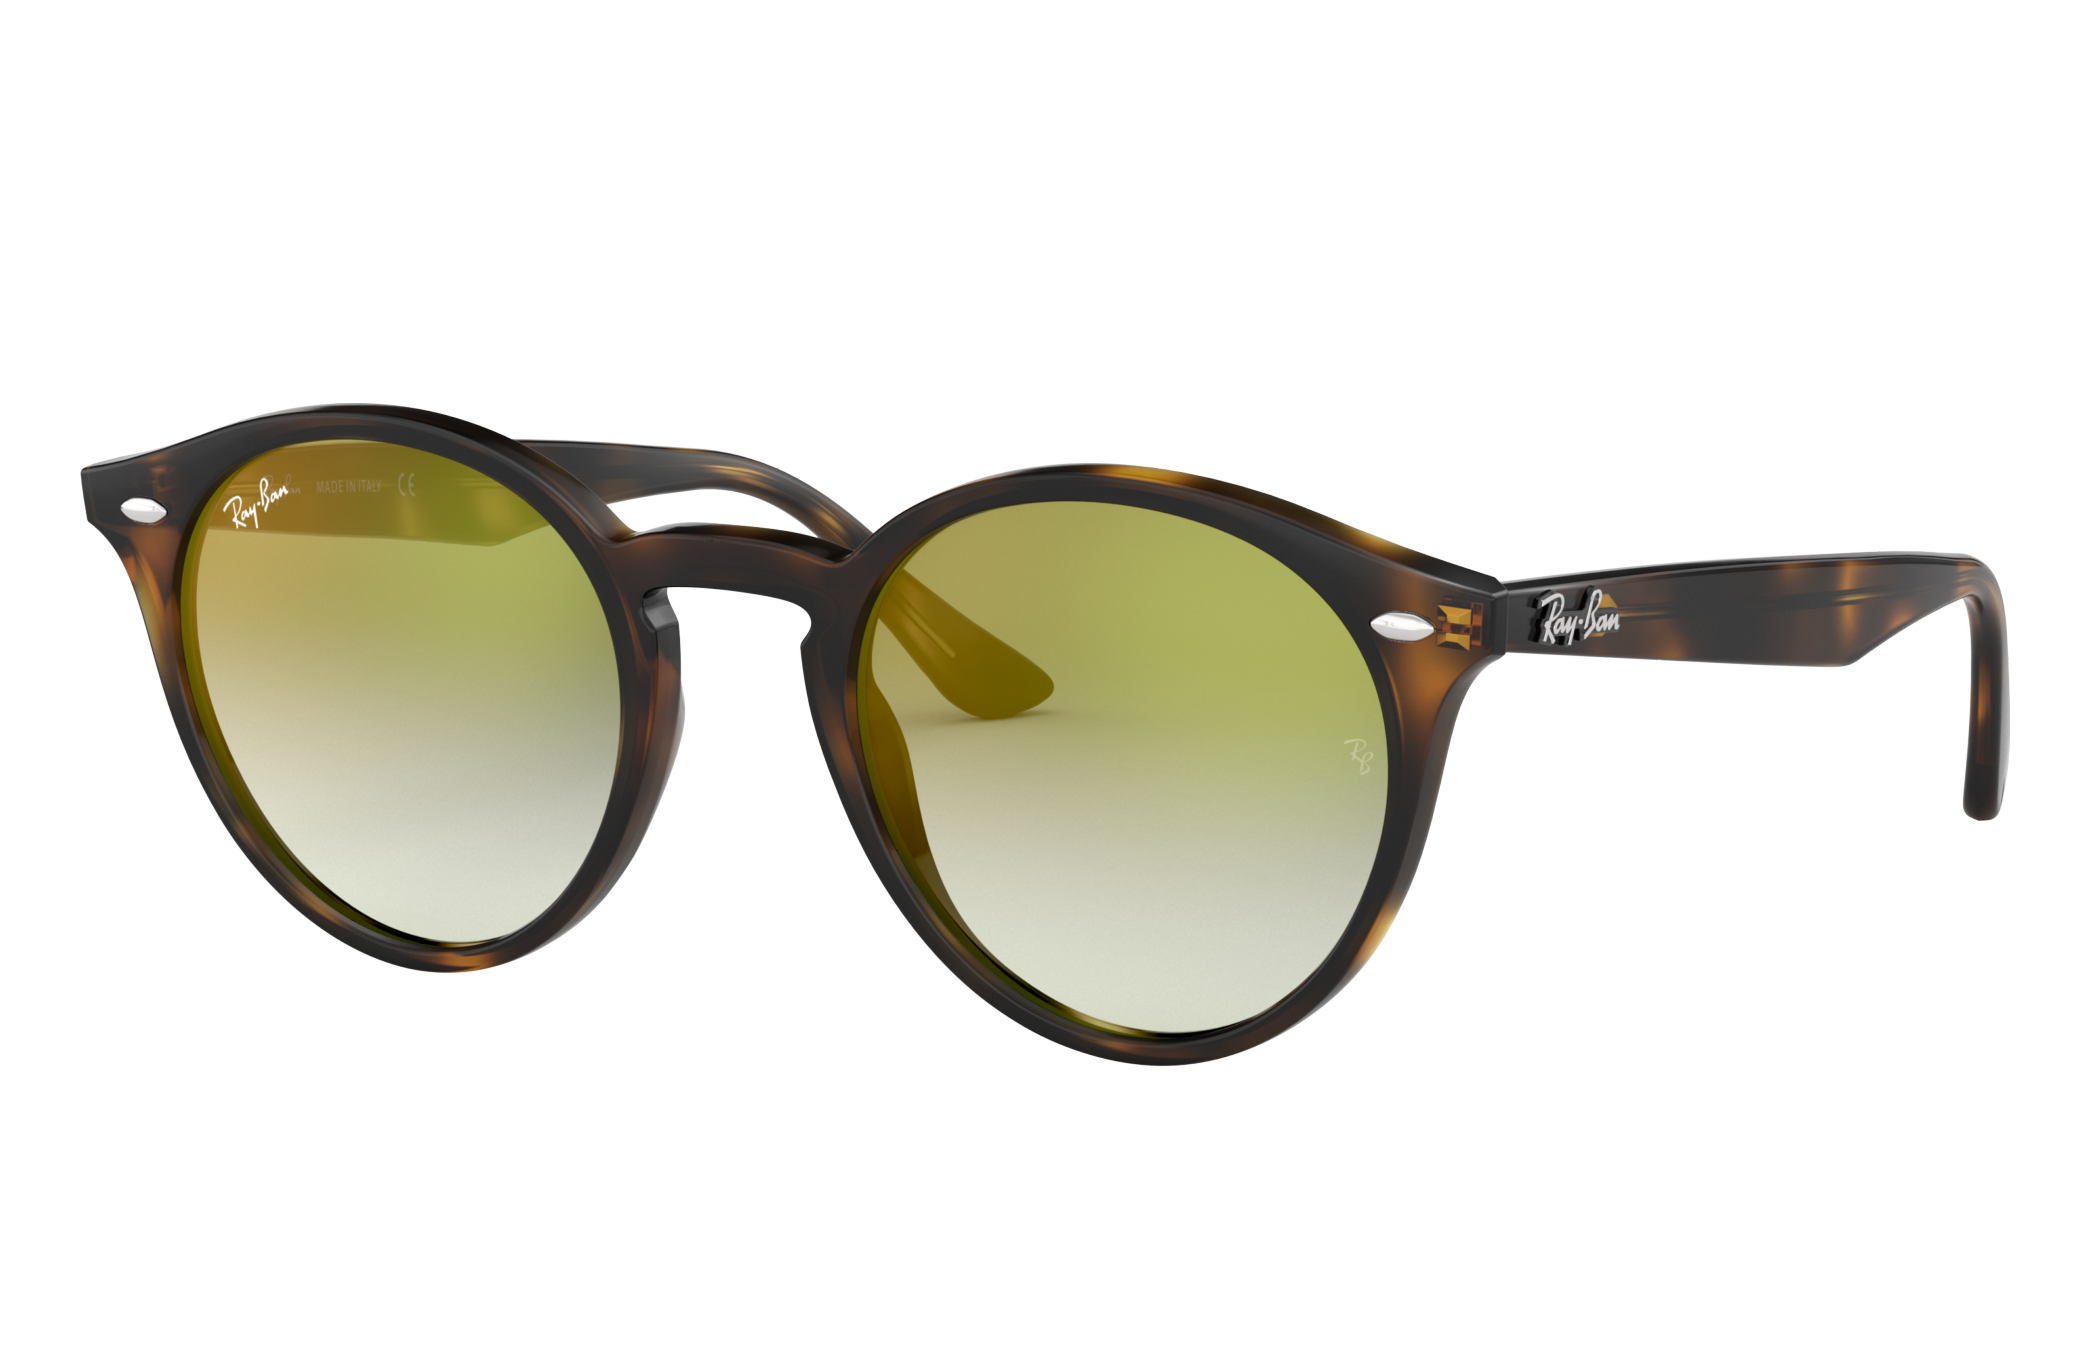 Rb2180 Sunglasses in Tartaruga and Verde | Ray-Ban®